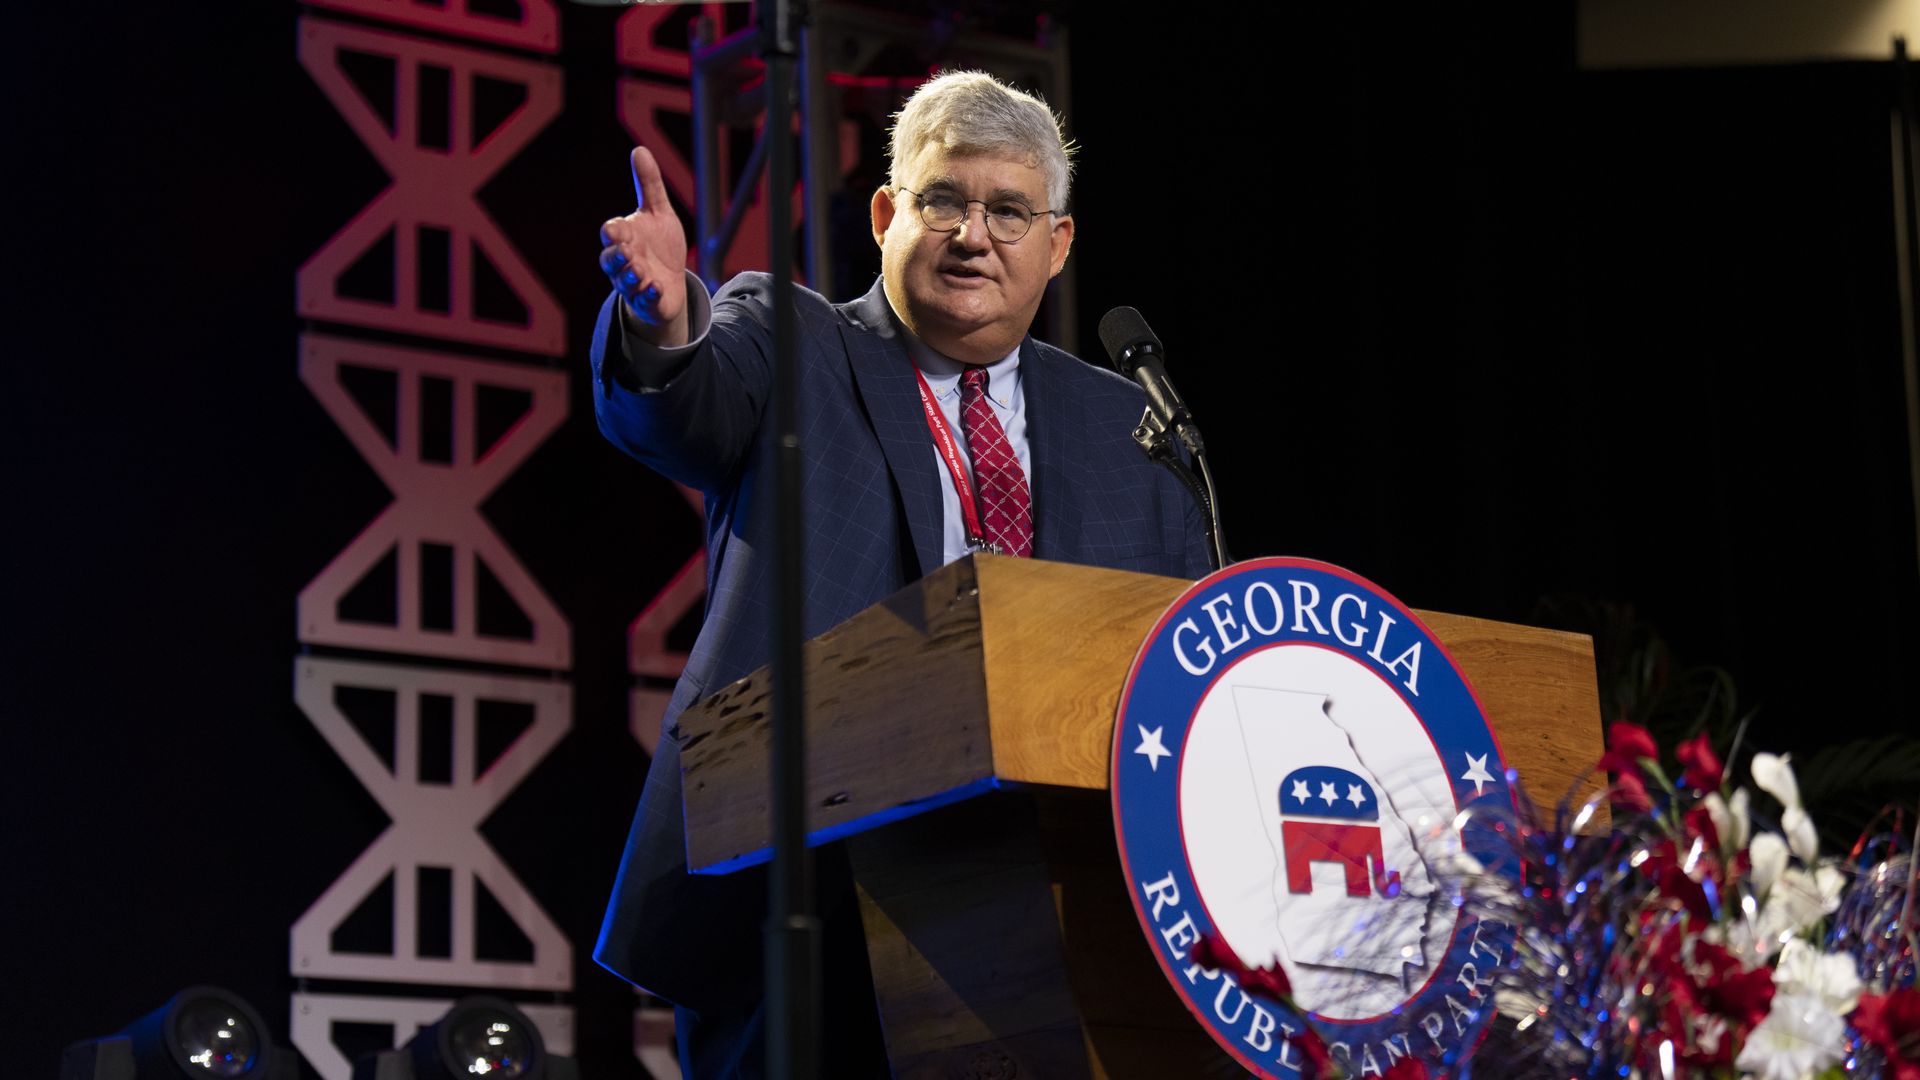 Chairman of the Georgia Republican Party David Shafer 